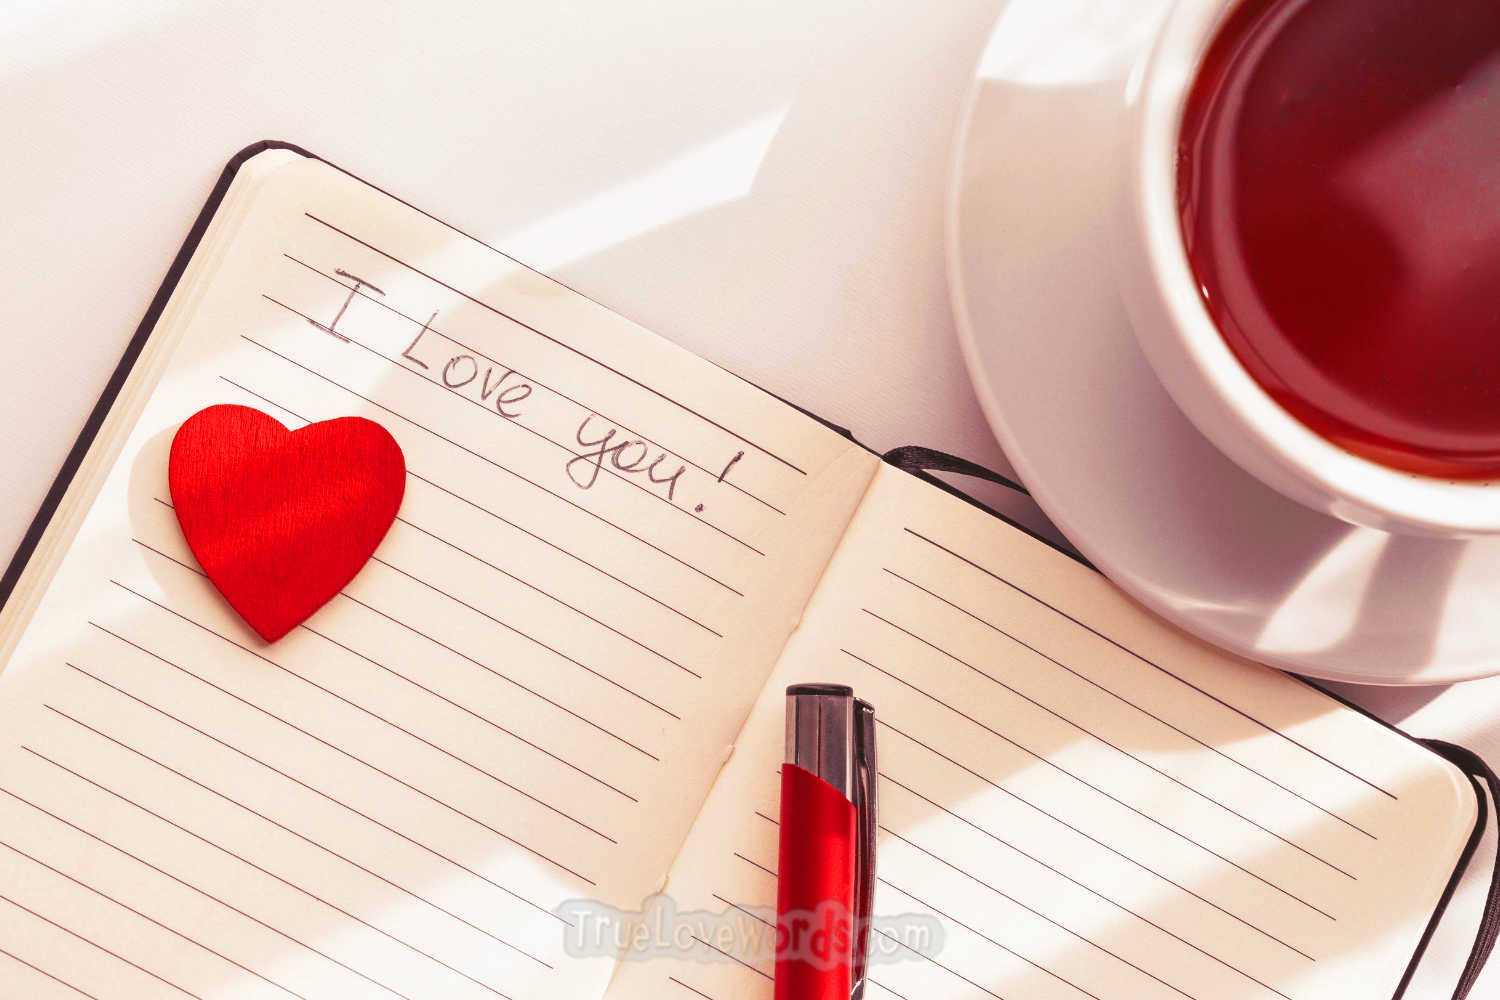 40 Good Morning Messages for Him » True Love Words